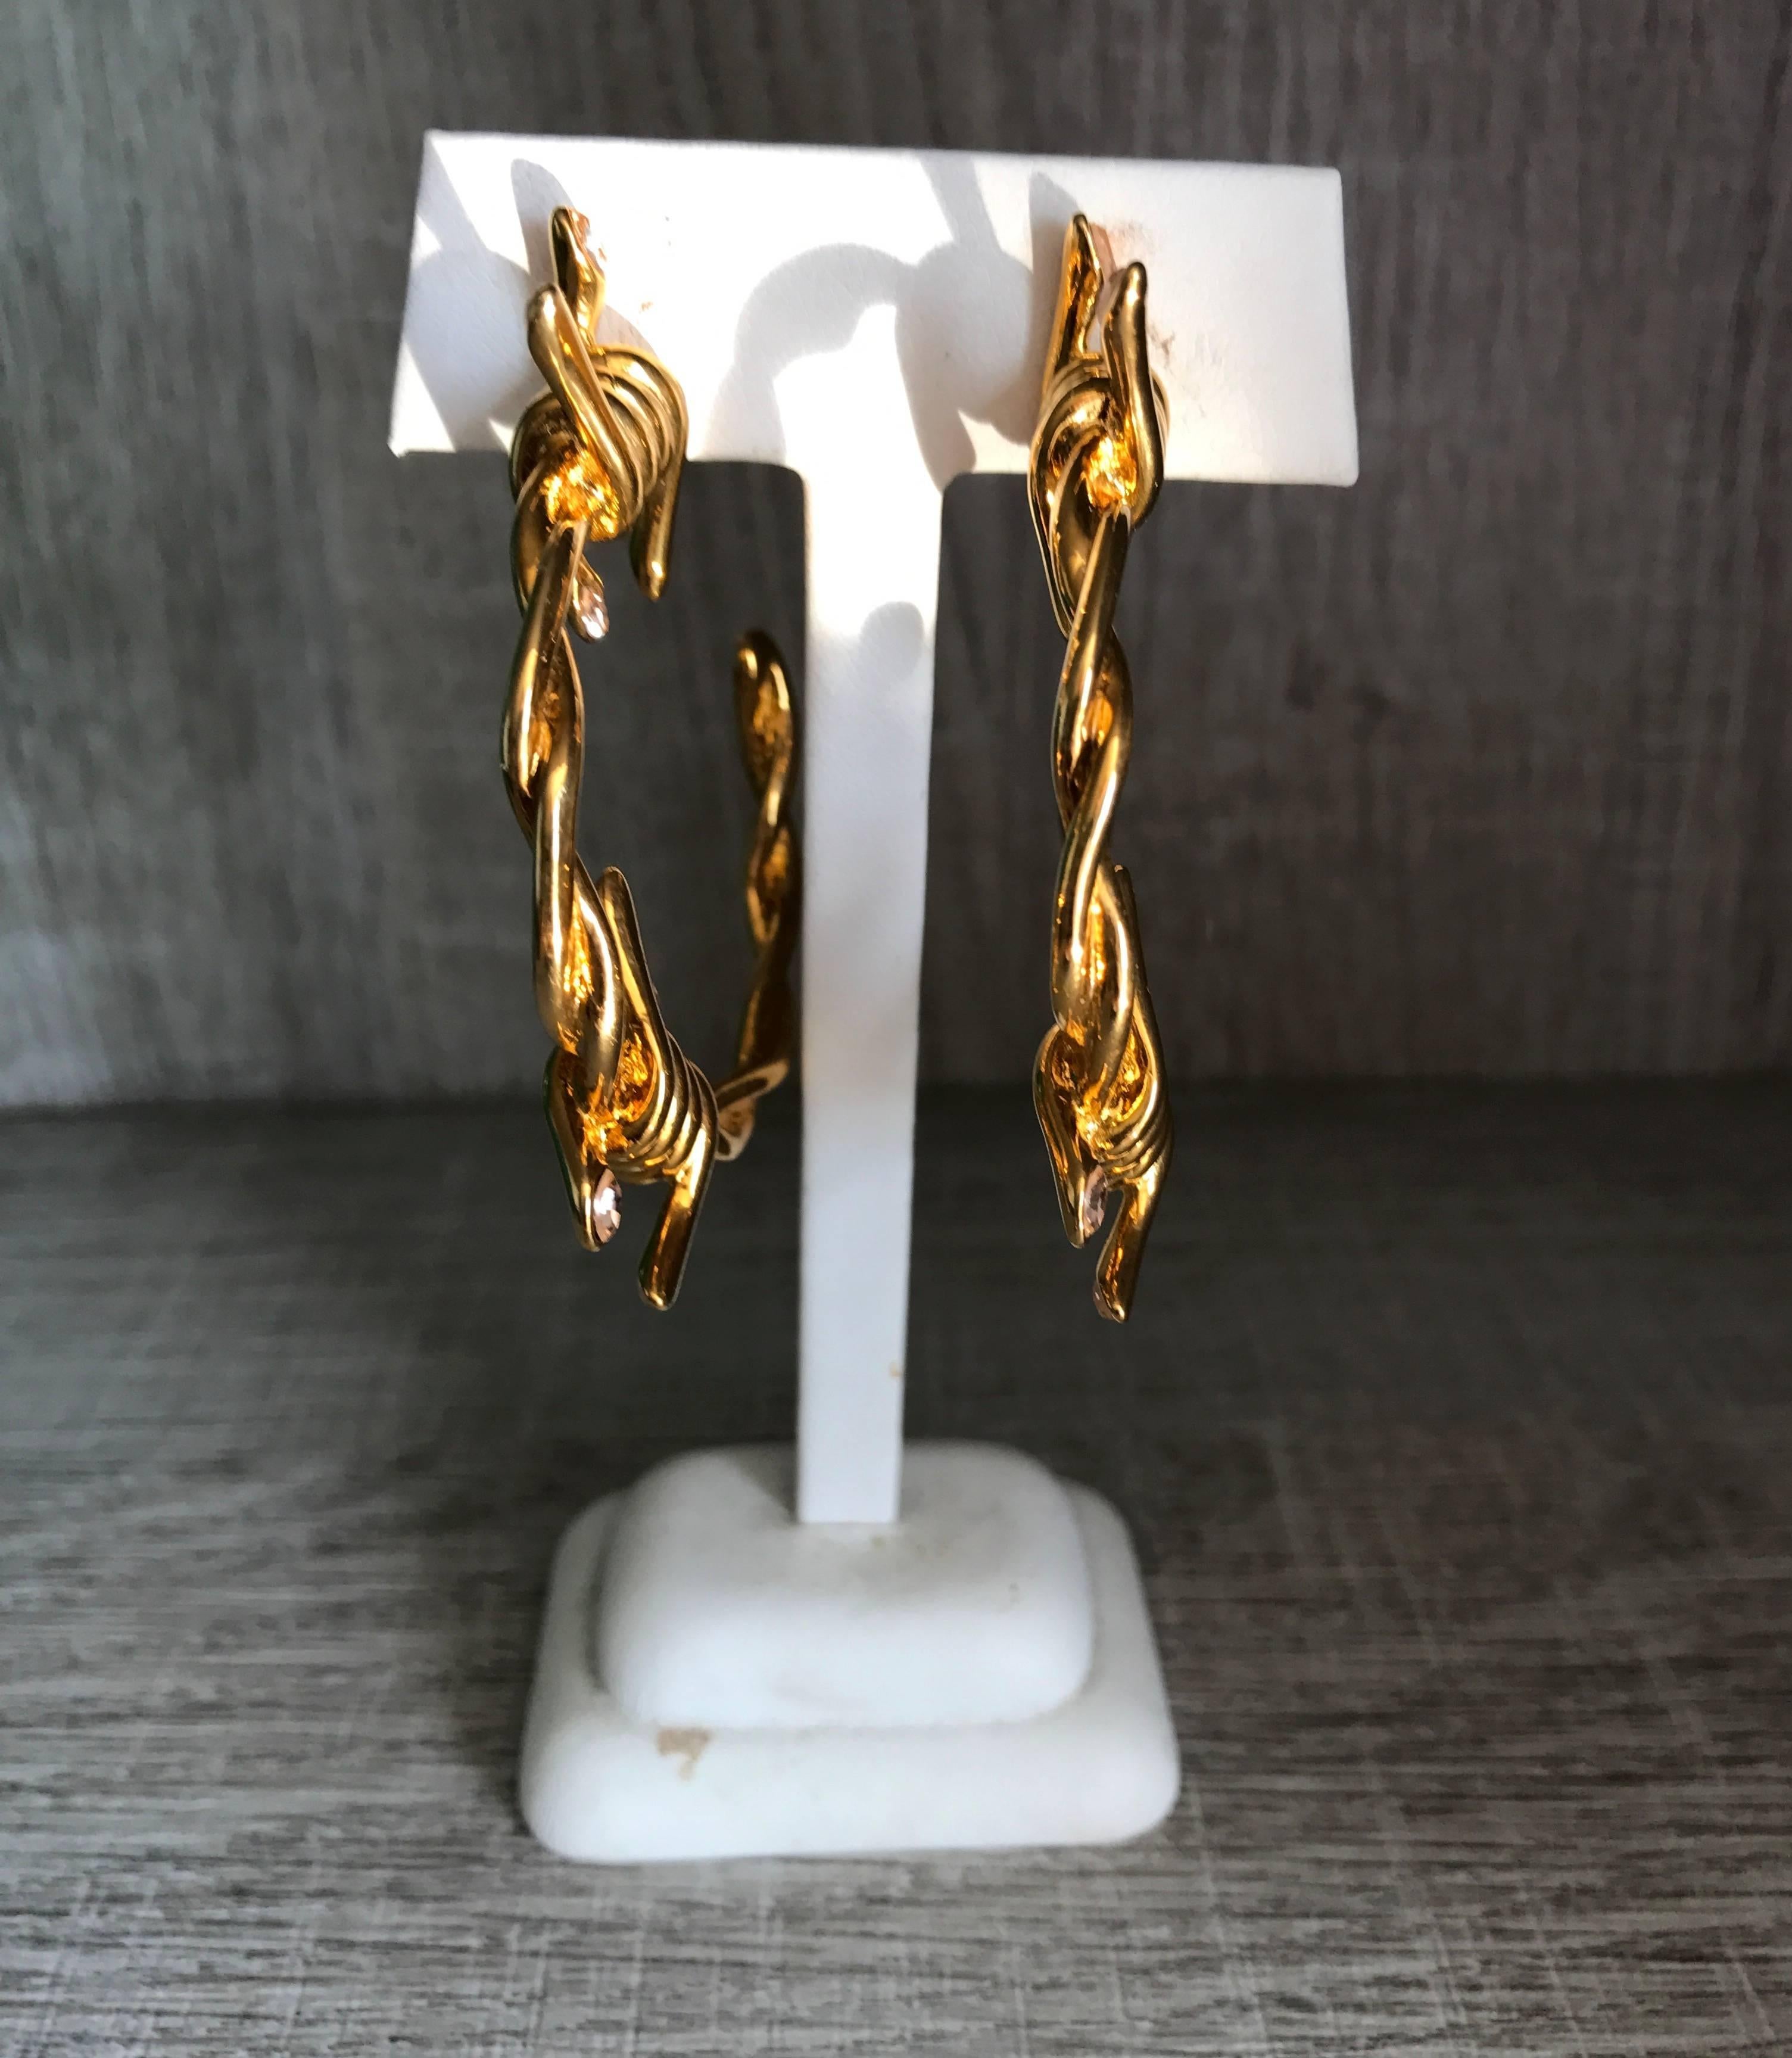 Women's Rare Vivienne Westwood For Agent Provocateur Gold Barbed Wire Big Hoop Earrings